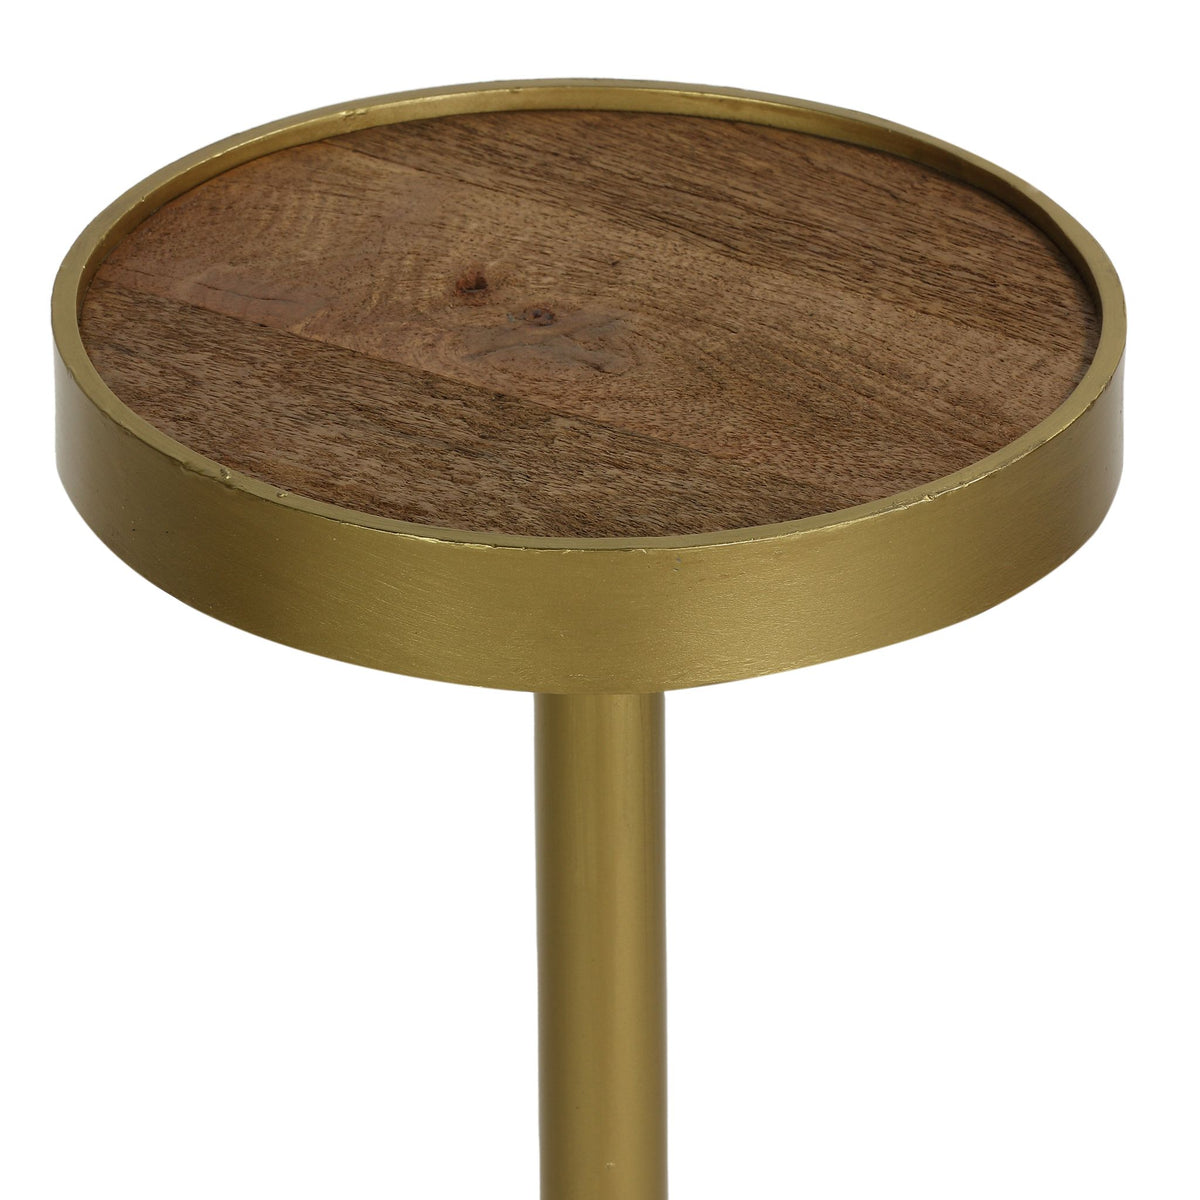 Bare Decor Maya Small Round Accent Table in Solid Metal and Wood, 8x8x25